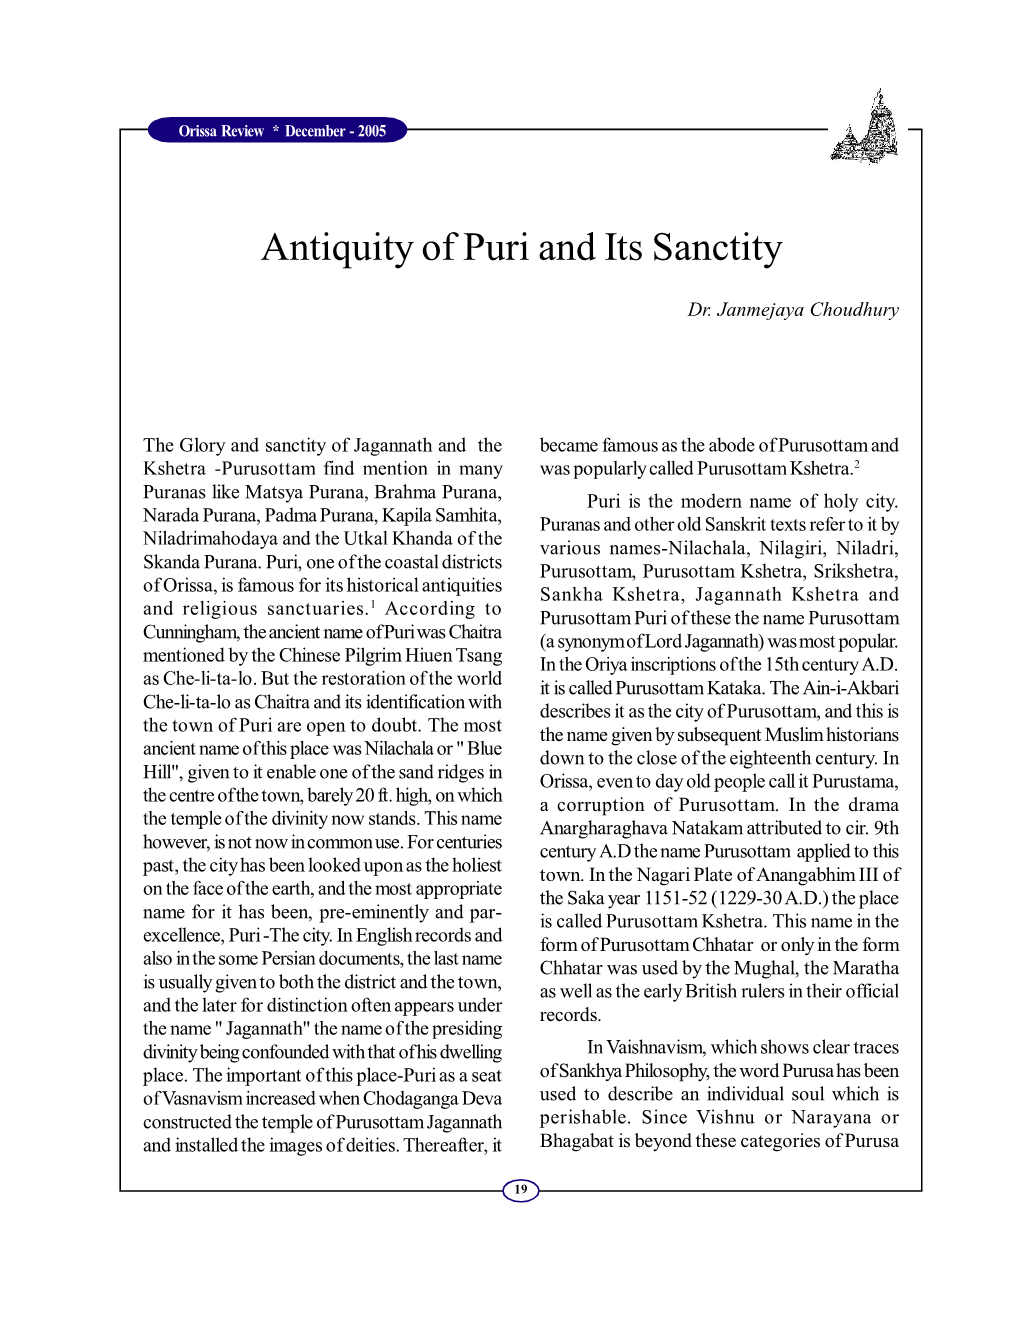 Antiquity of Puri and Its Sanctity